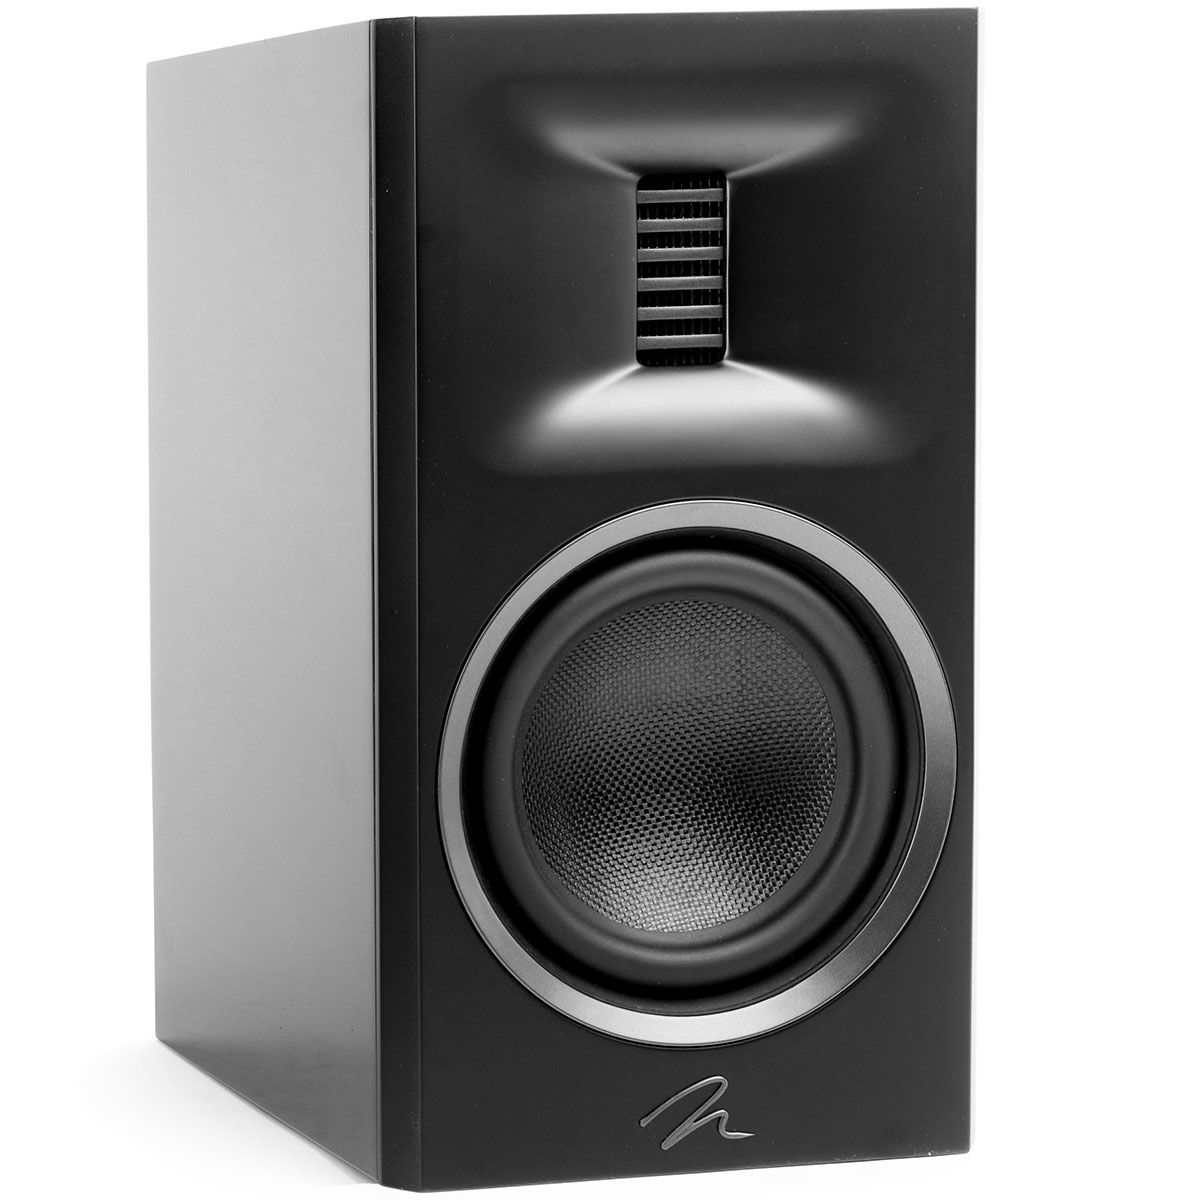 MartinLogan Motion XT B100  Bookshelf Speaker in black, angled view without grilles on white background